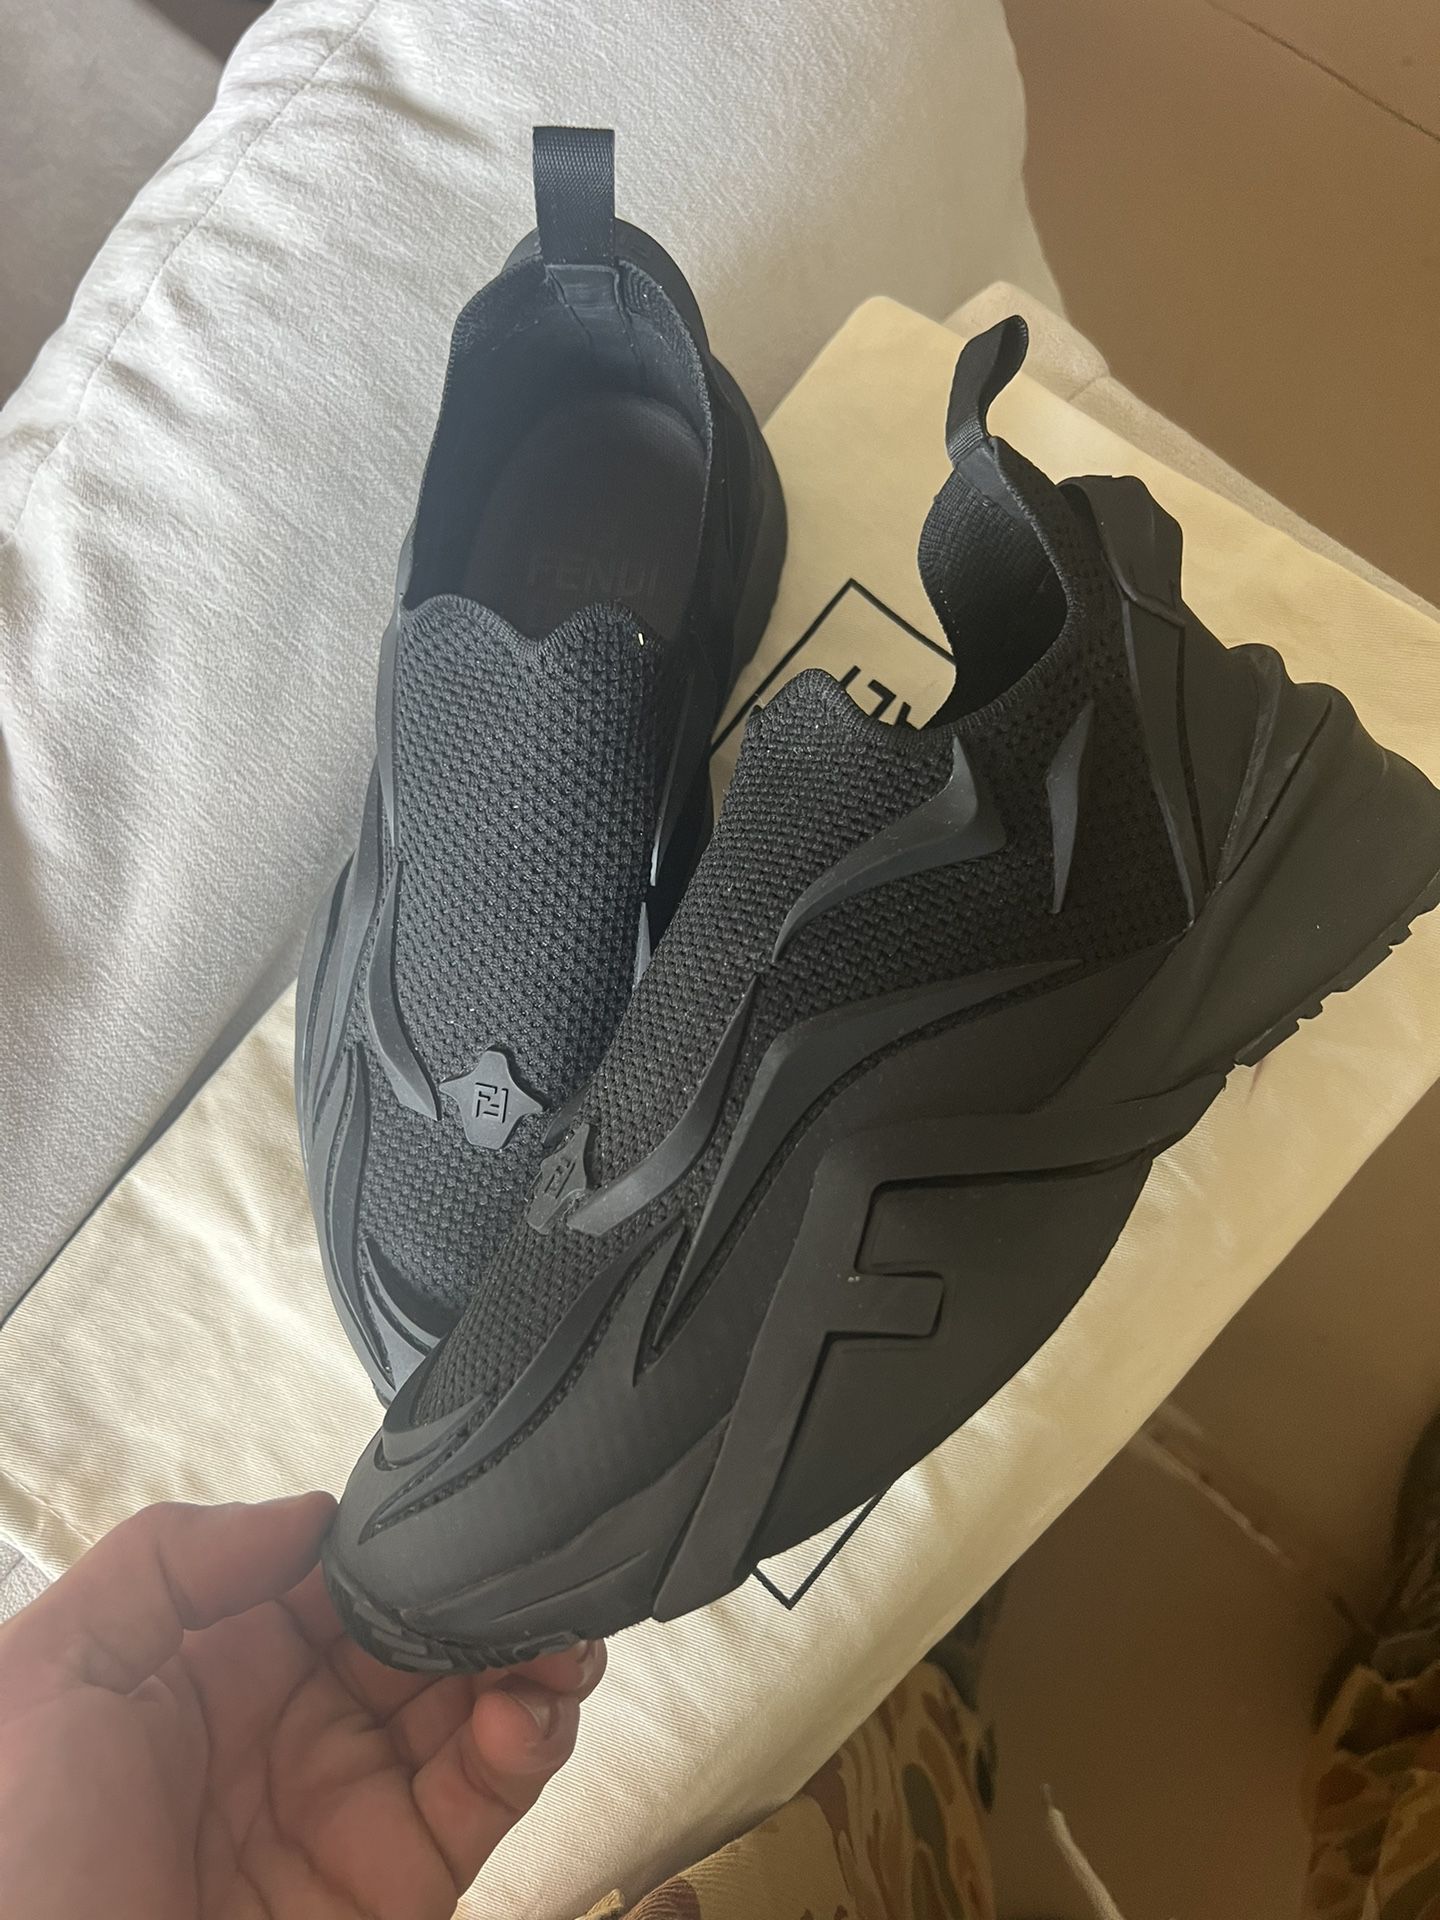 Fendi Shoes for Sale in West Hollywood, CA - OfferUp